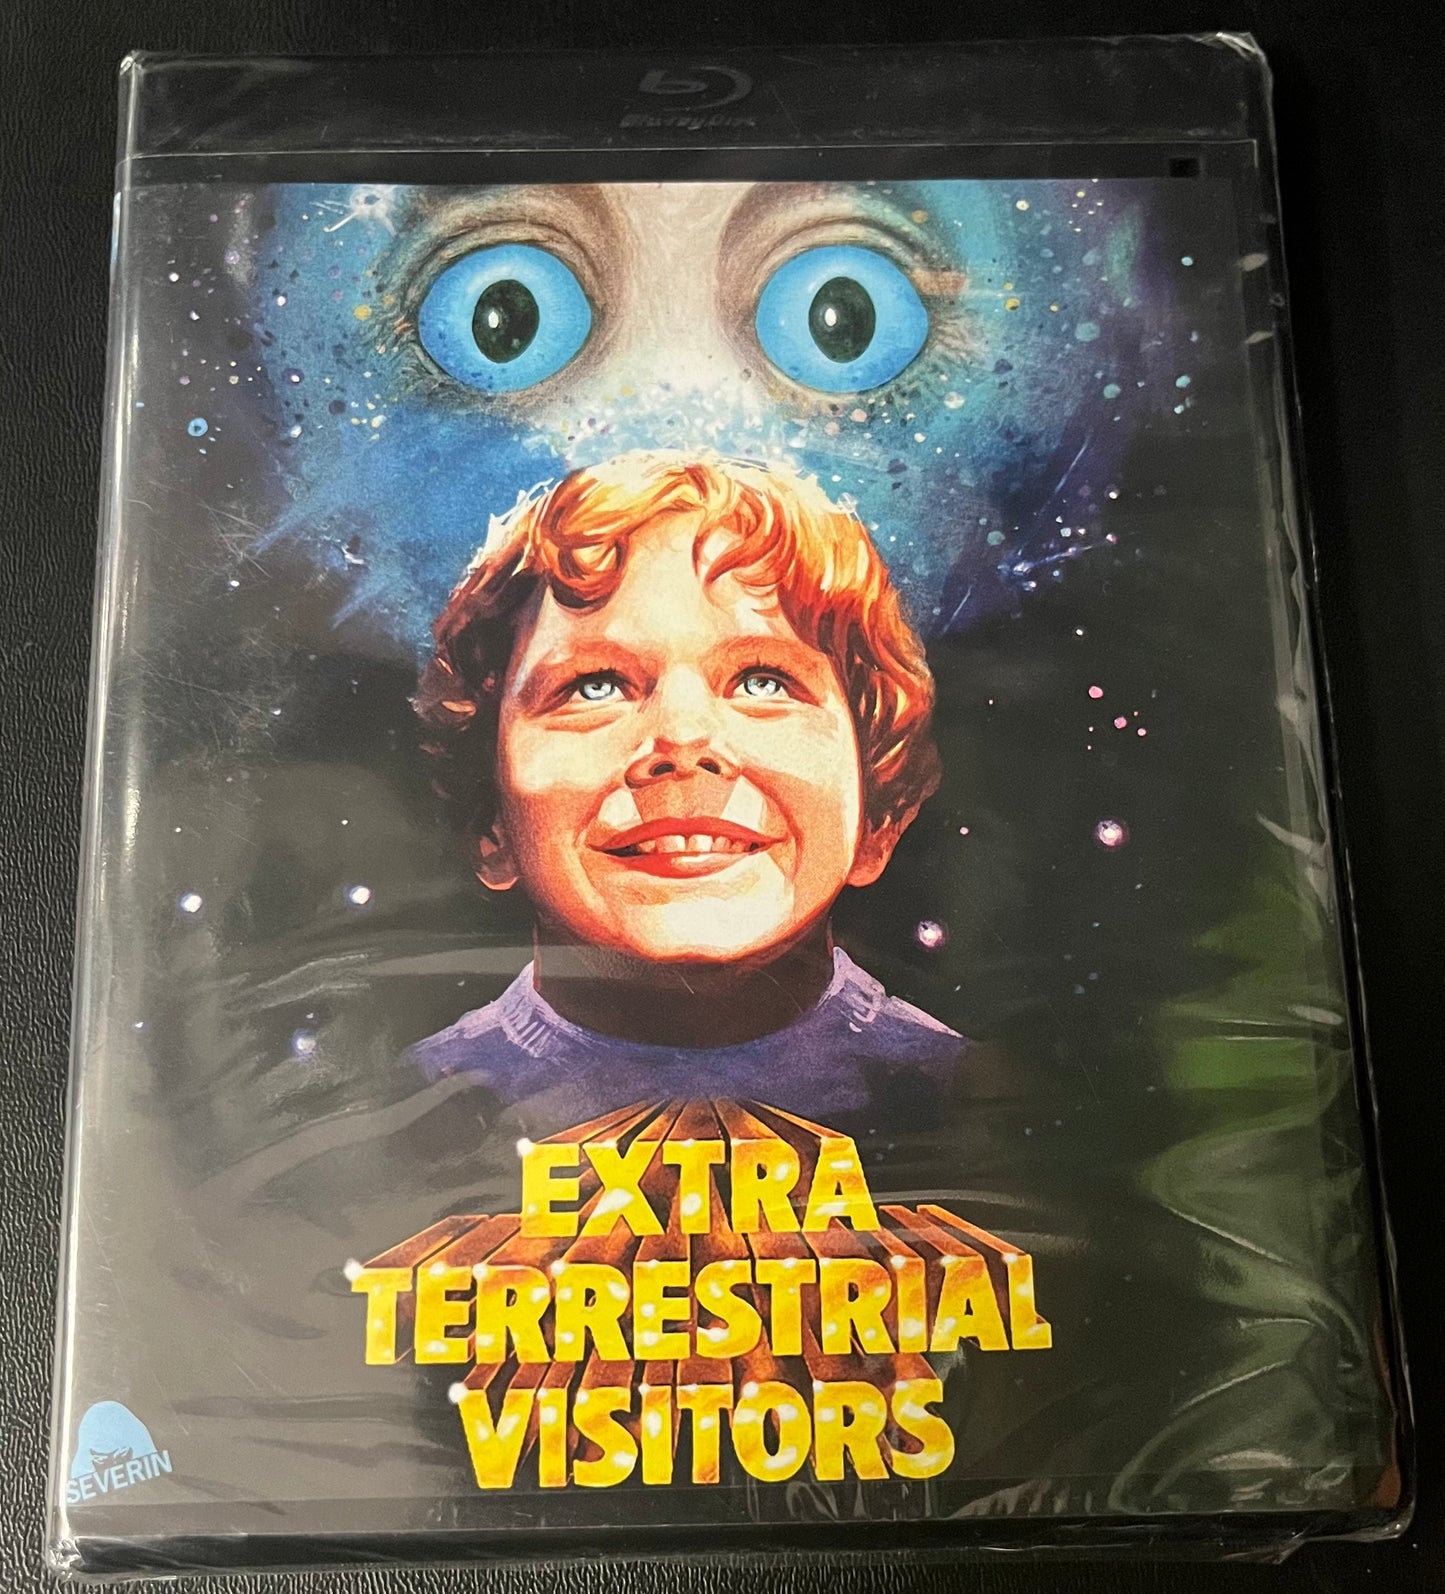 EXTRA TERRESTRIAL VISITORS (1983) BLU RAY NEW